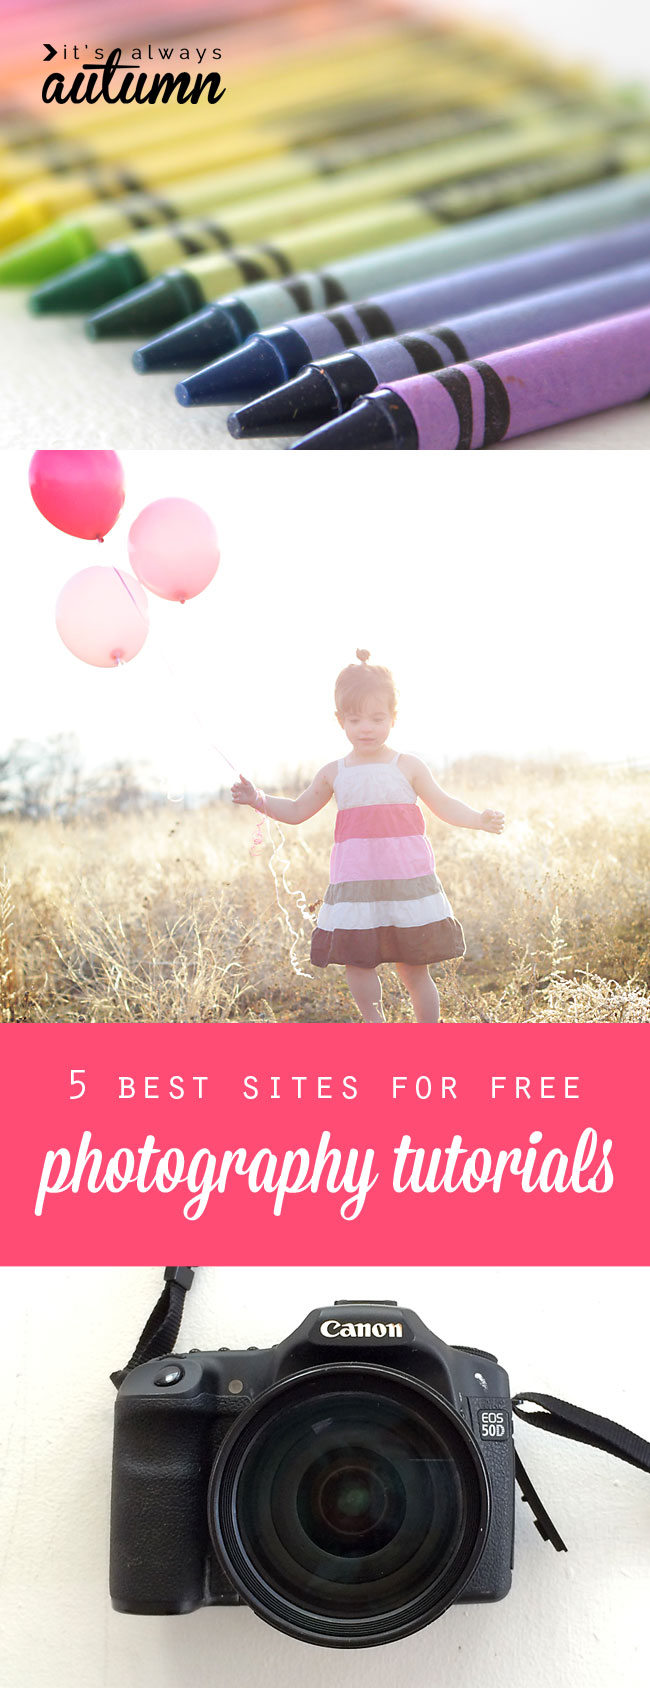 5 best sites for free online photography tutorials. I need to check these out and learn how to use my camera!